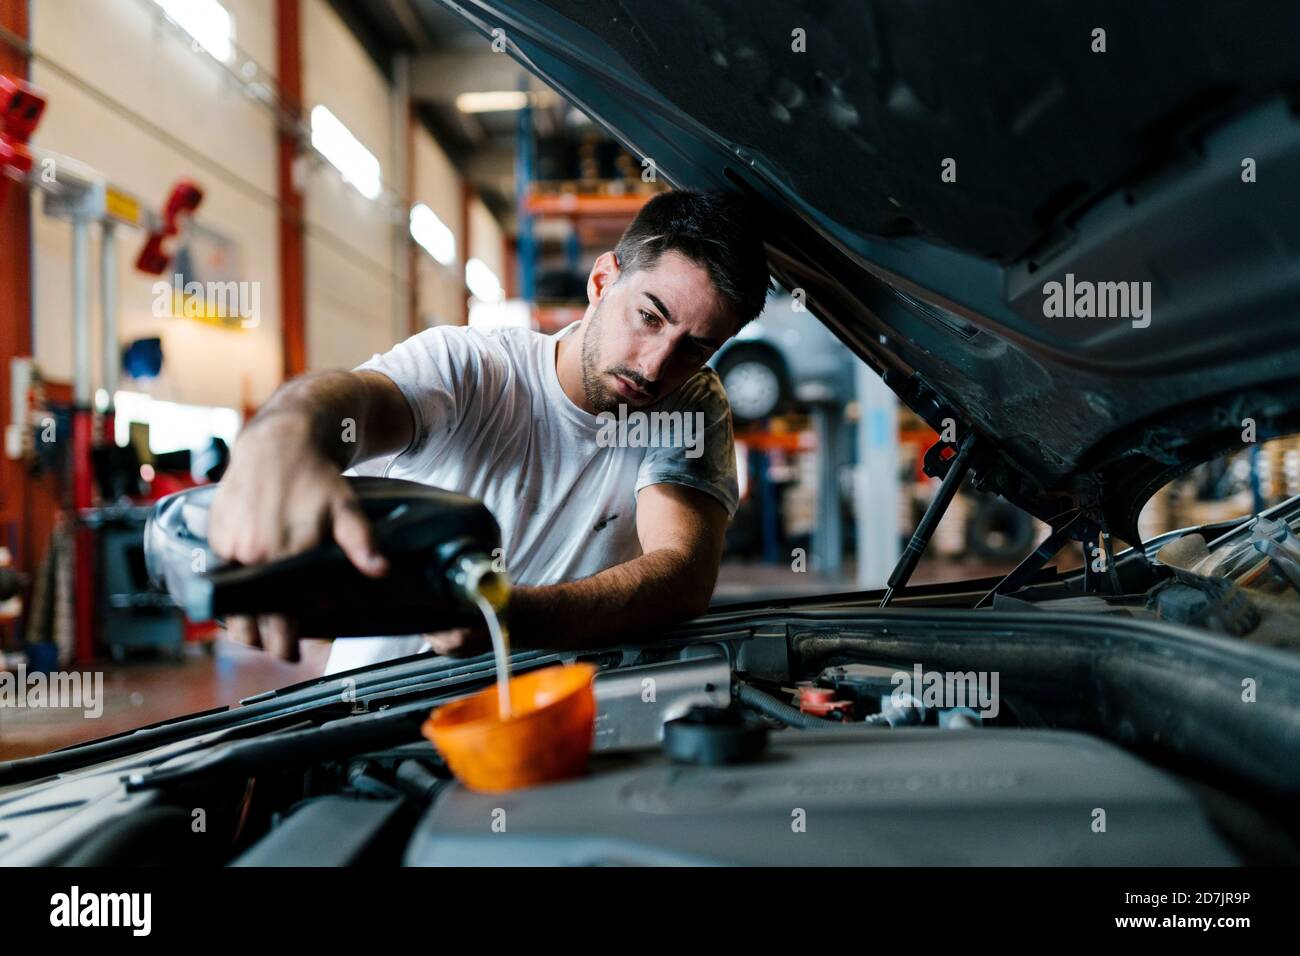 Auto mechanic filling engine oil while standing in garage Stock Photo